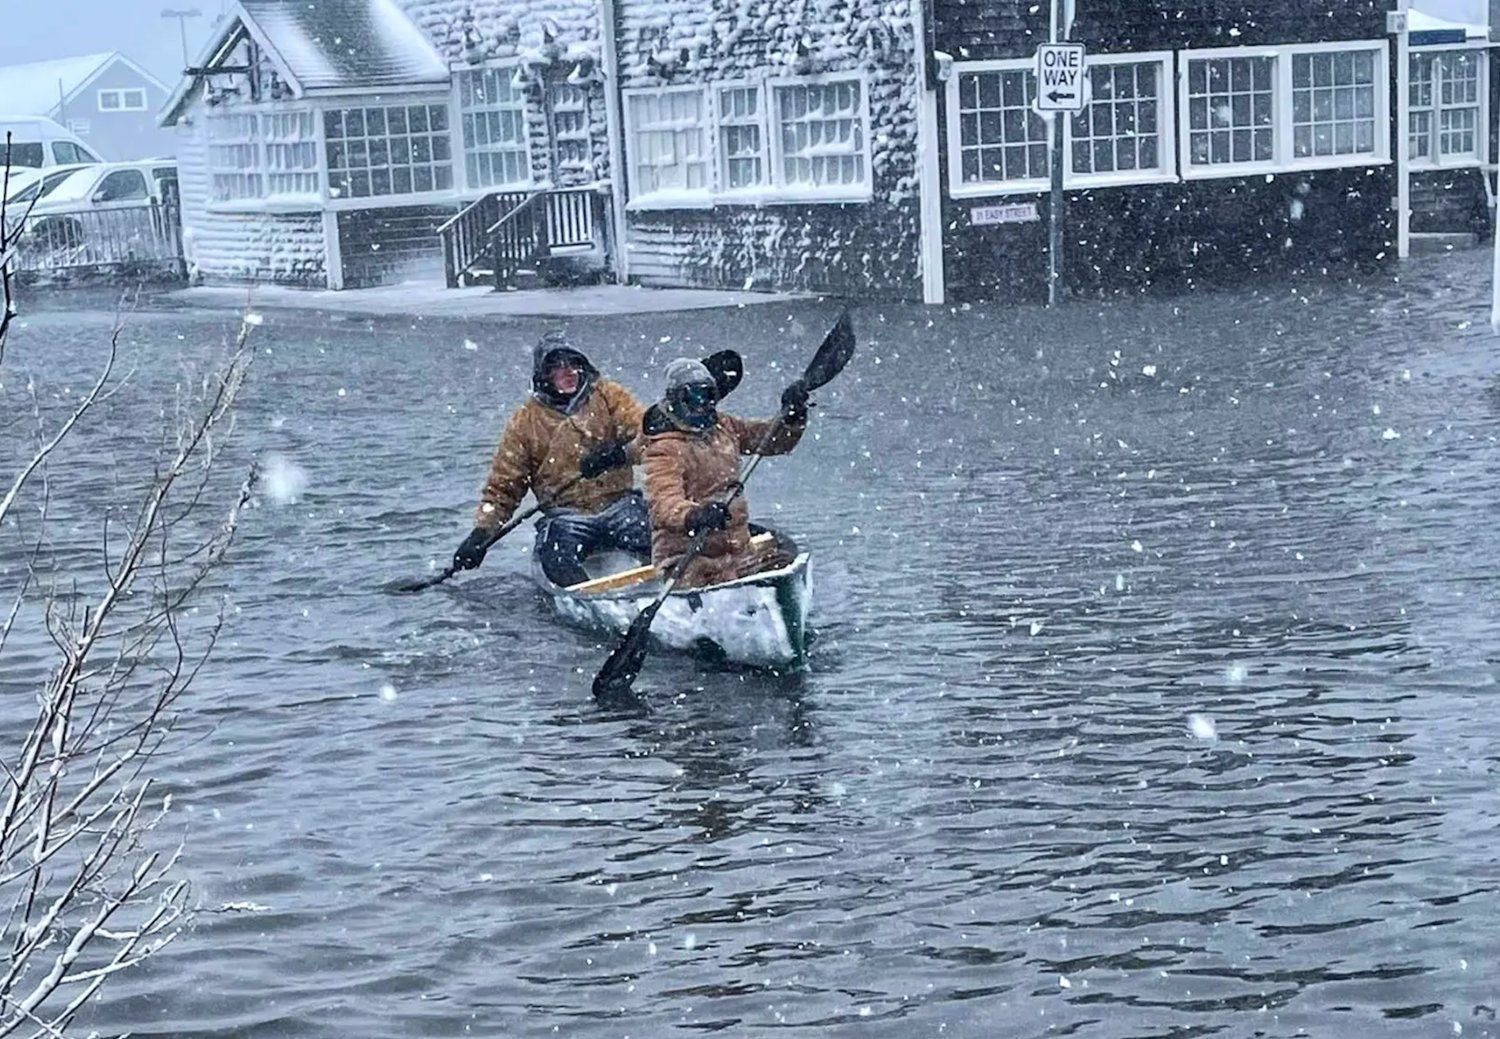 Ian Williams and Luke Stringer canoe up a flooded Broad Street during Saturday’s nor’easter.